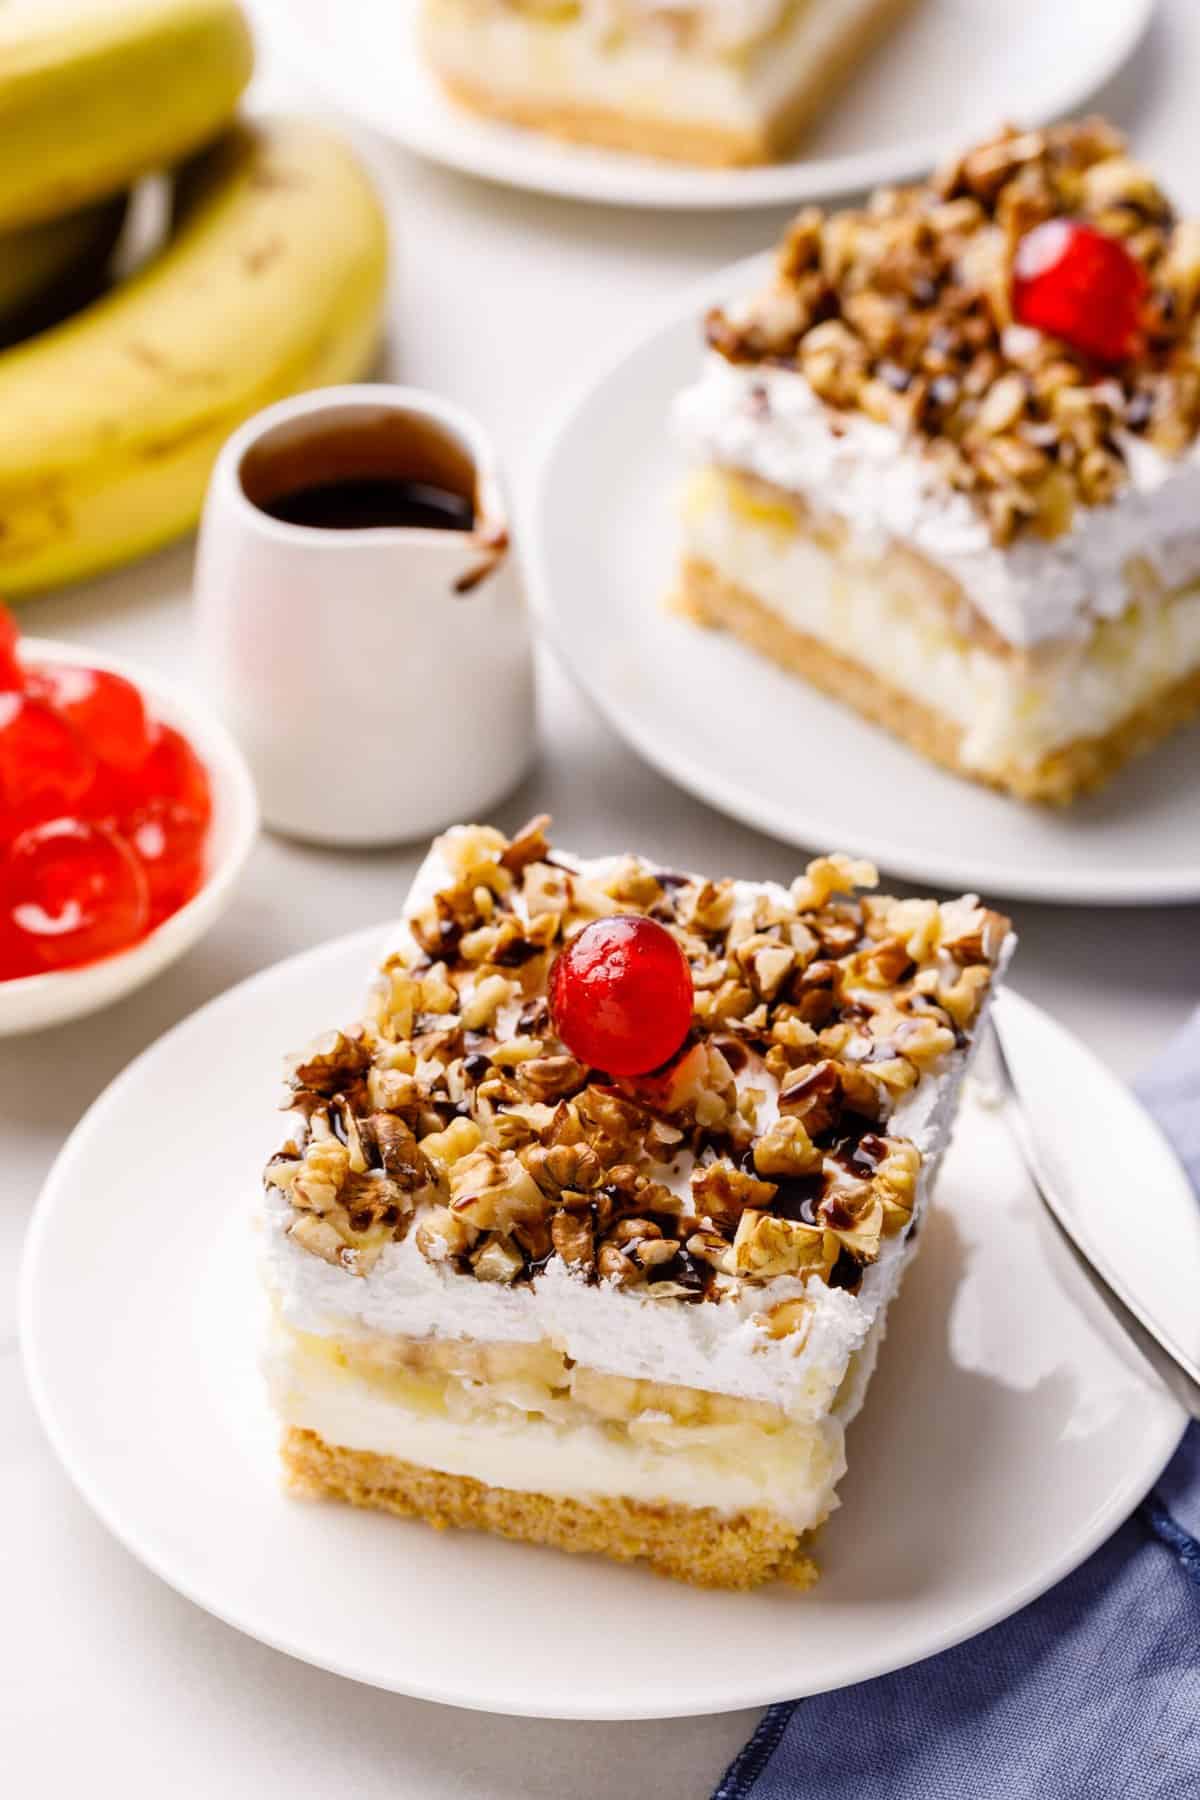 square slice serving of banana split cake served on a white round plate with a silver fork